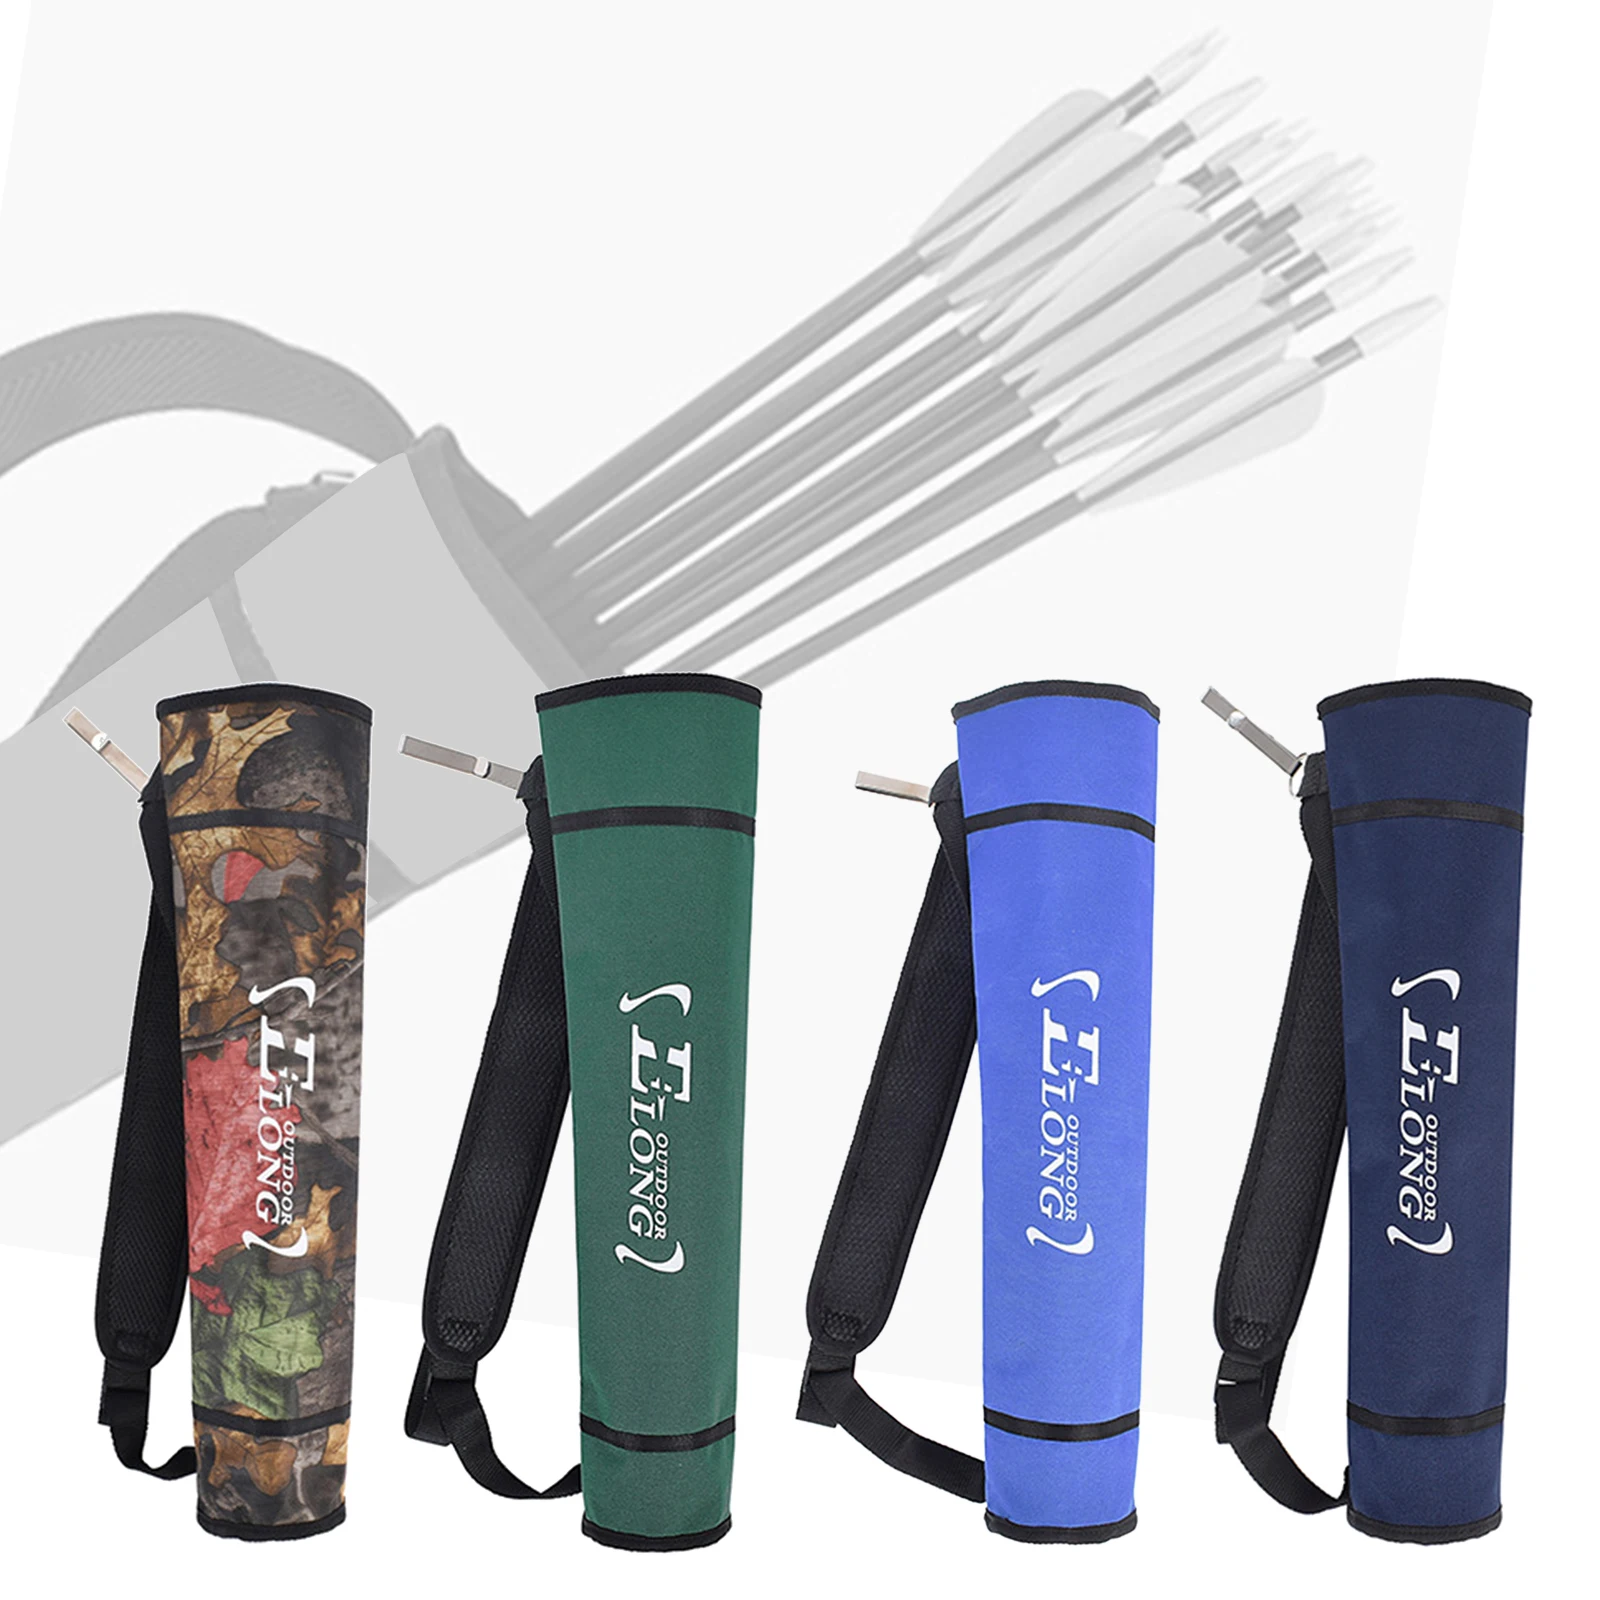 Portable Archery Arrow Quiver Bow Holder Case with Belt Adjustable Hip Waist Carrier Bag Storage Pocket Hunting Accessories